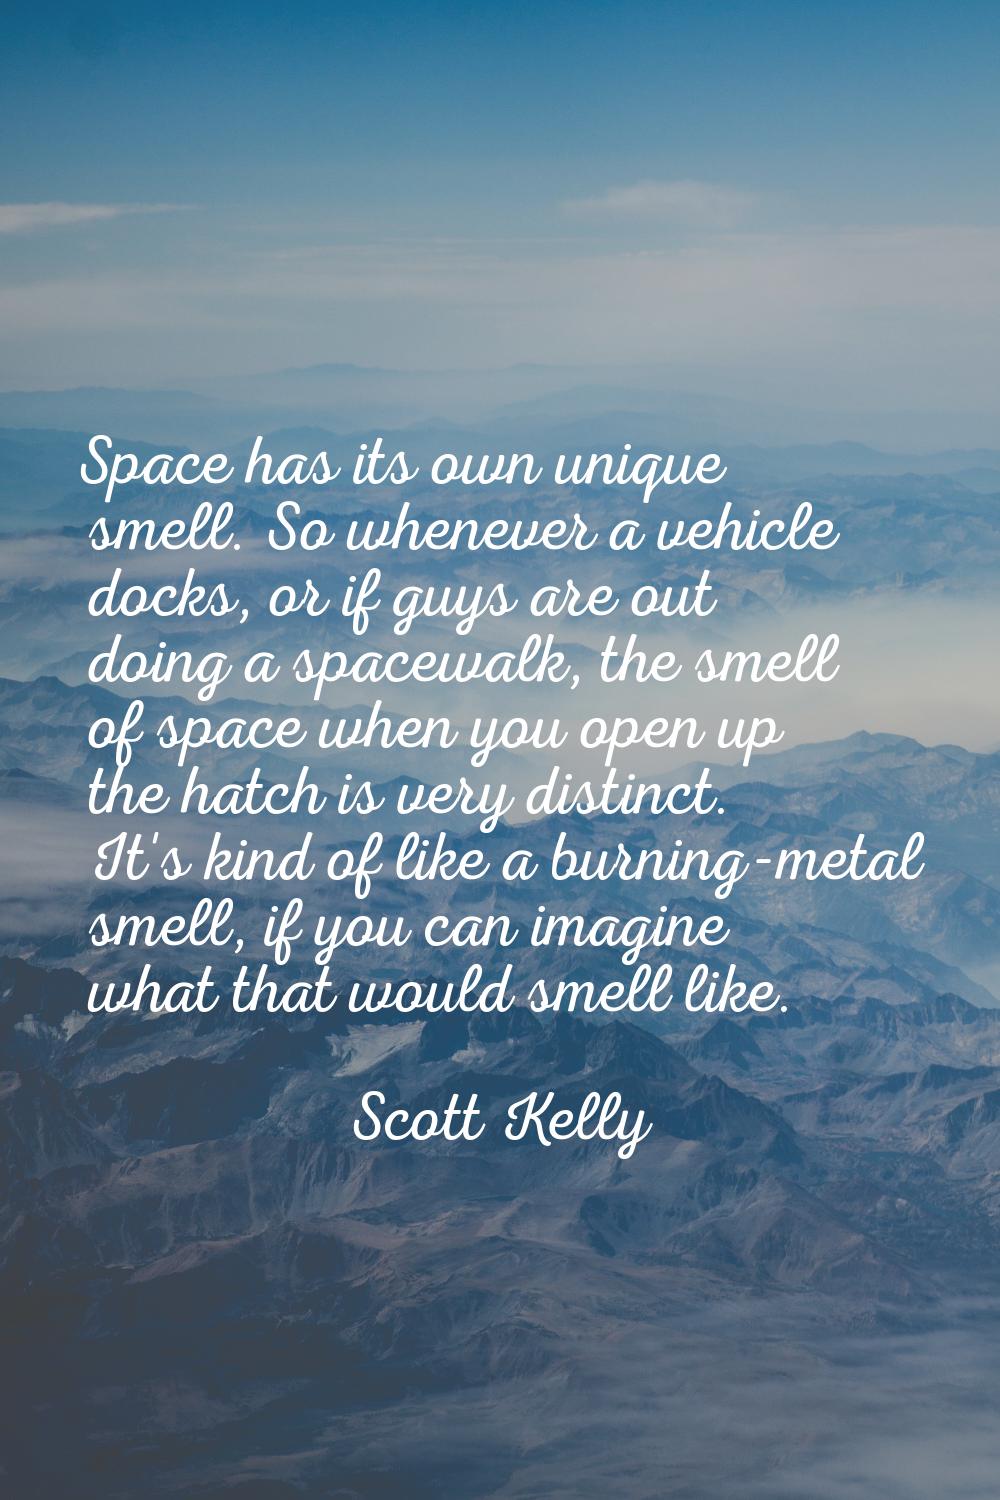 Space has its own unique smell. So whenever a vehicle docks, or if guys are out doing a spacewalk, 